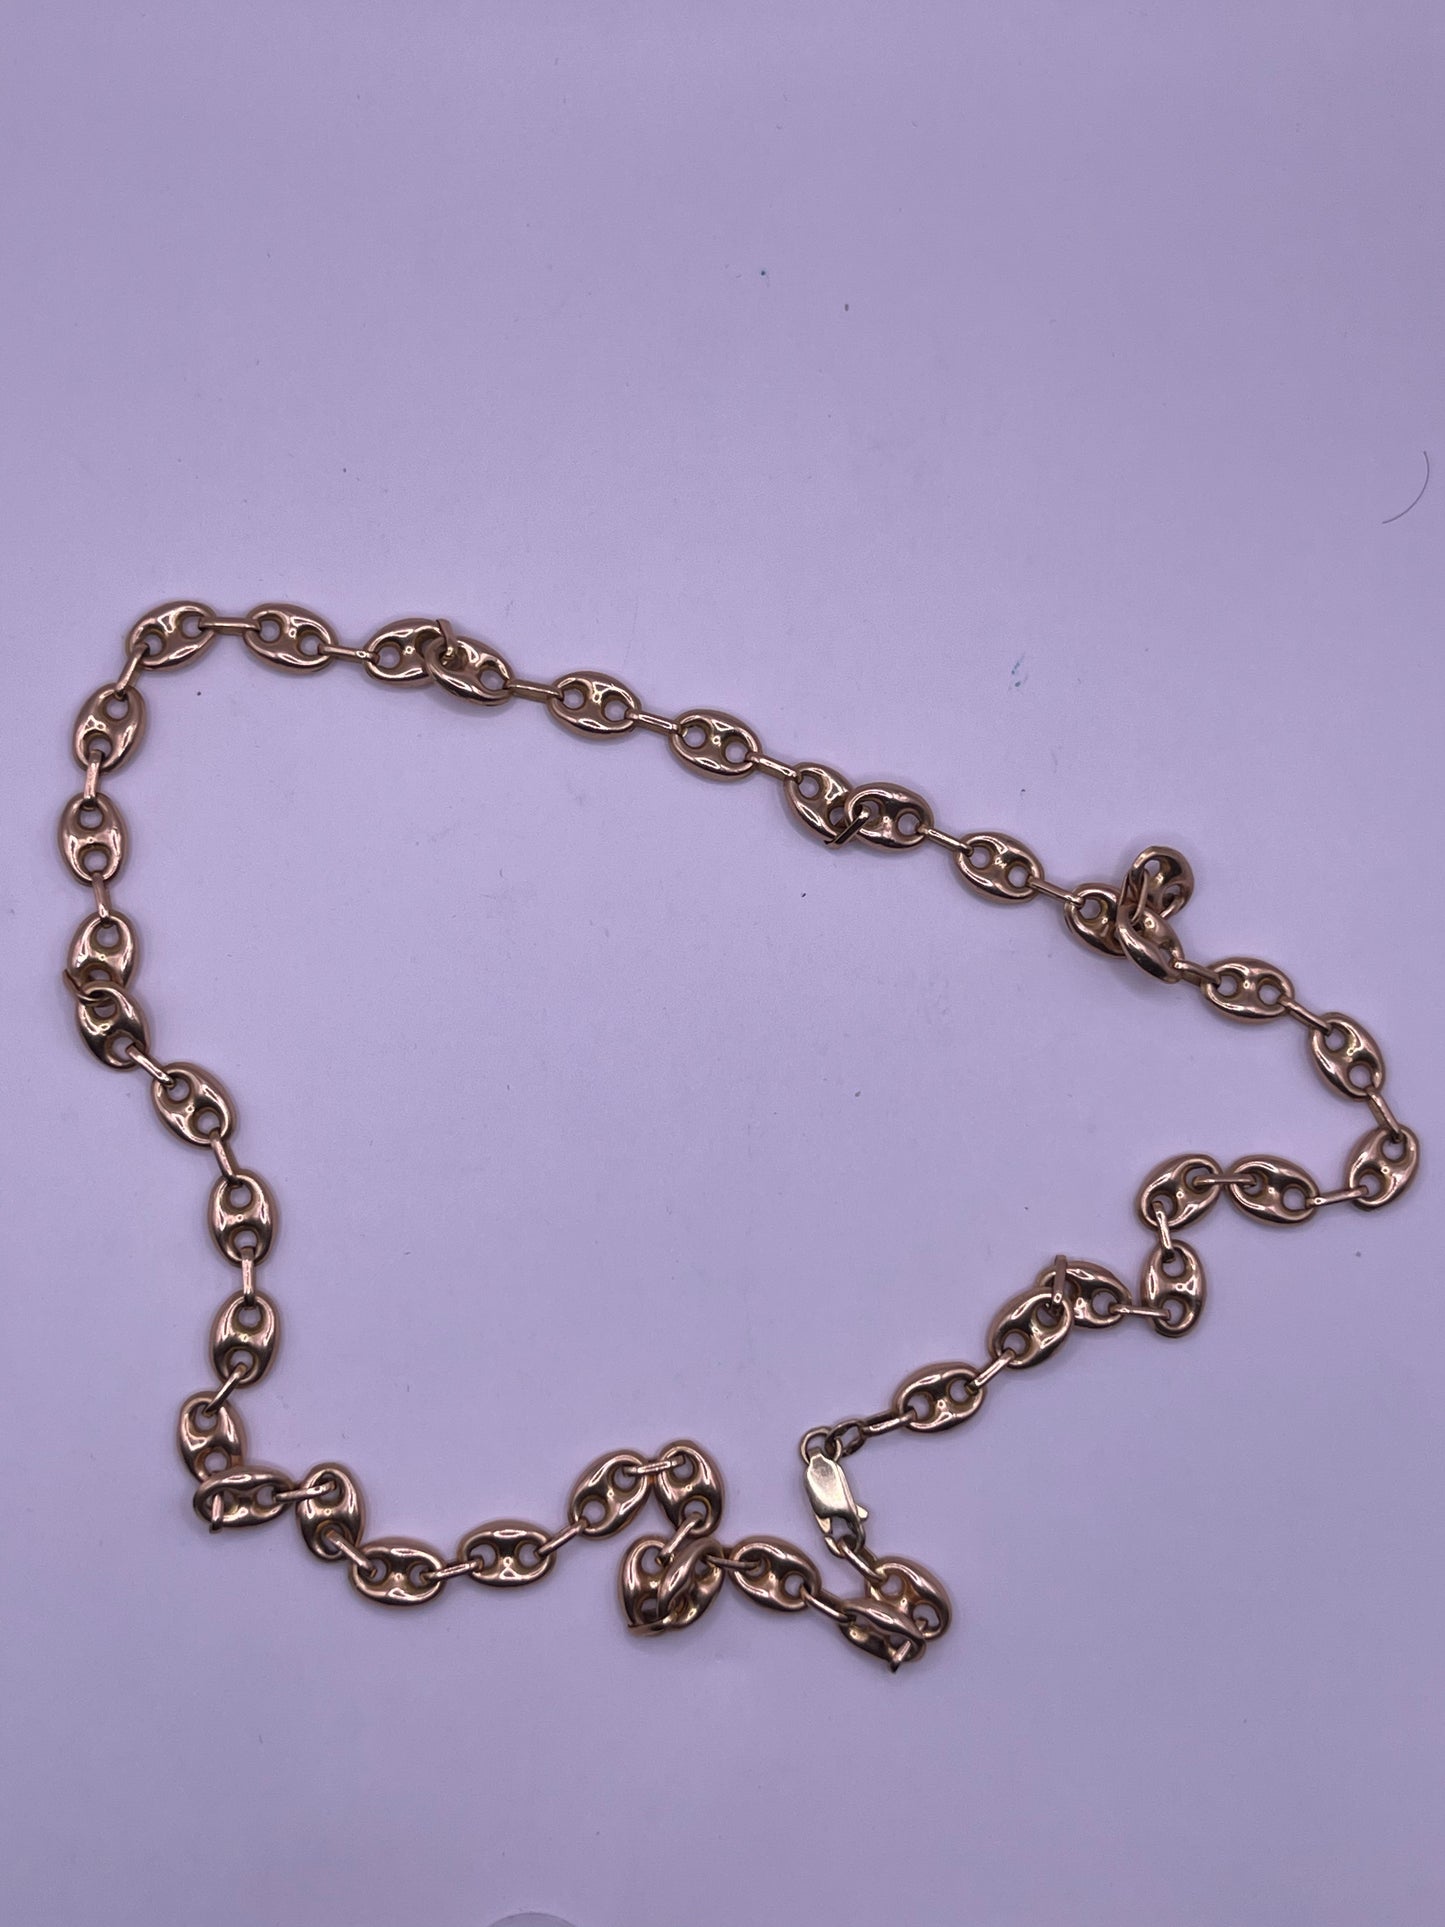 A 14kt gold chain